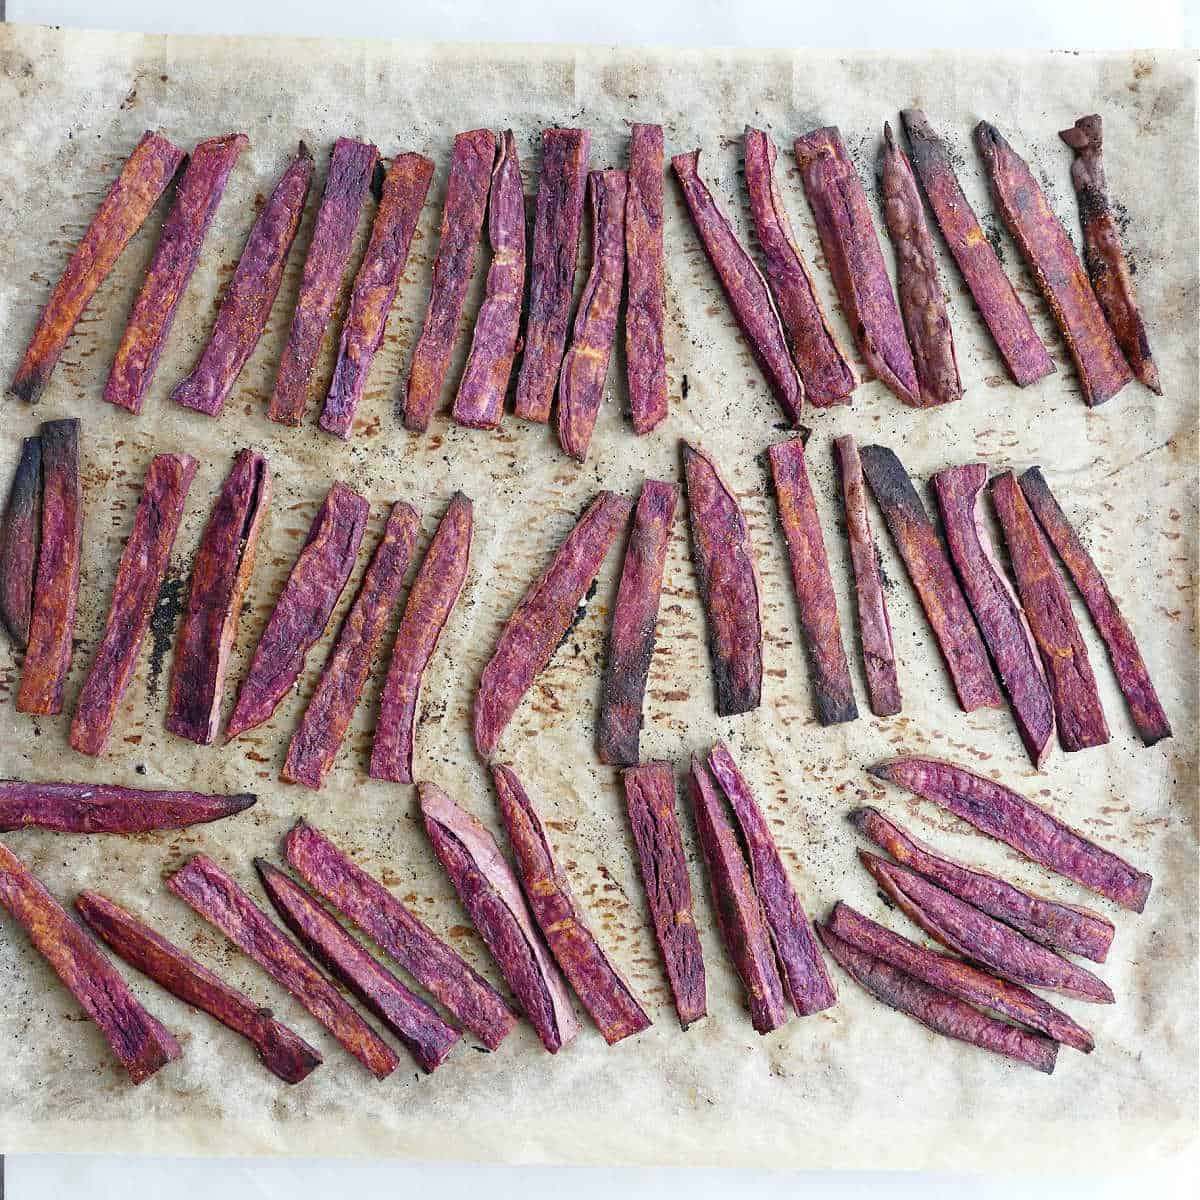 baked purple sweet potato fries after coming out of the oven on a baking sheet